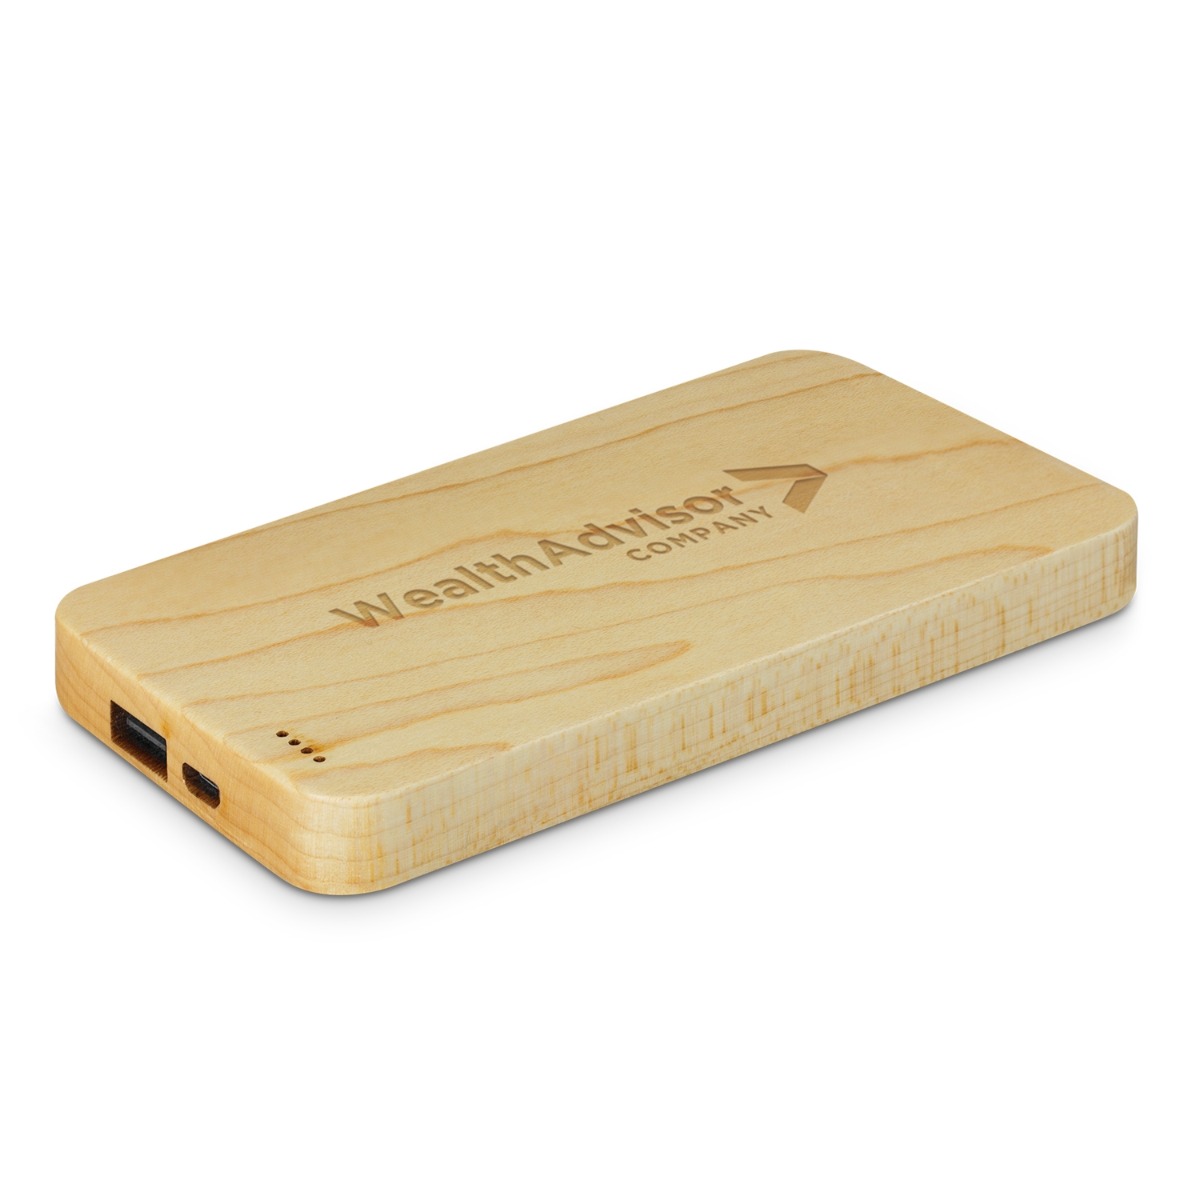 powerbank with wooden exterior